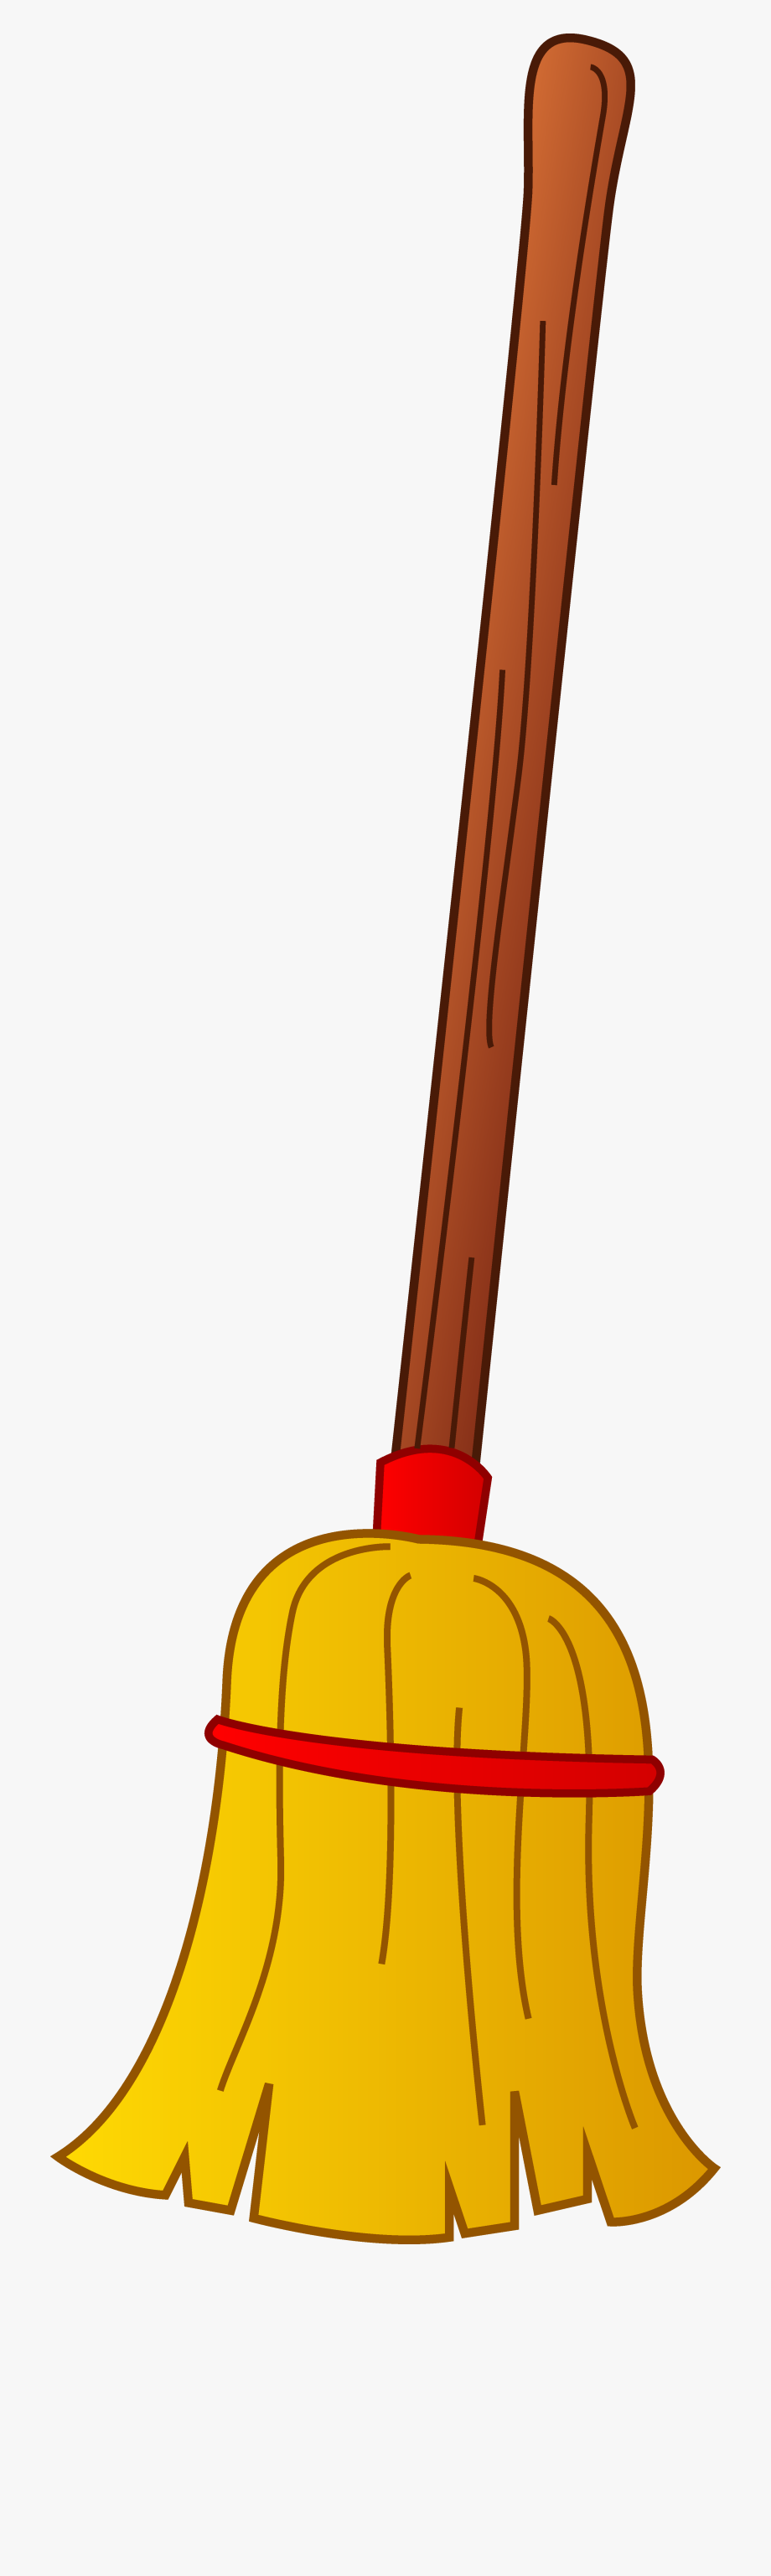 Sweep free cliparts on. Dust clipart broom sweeping